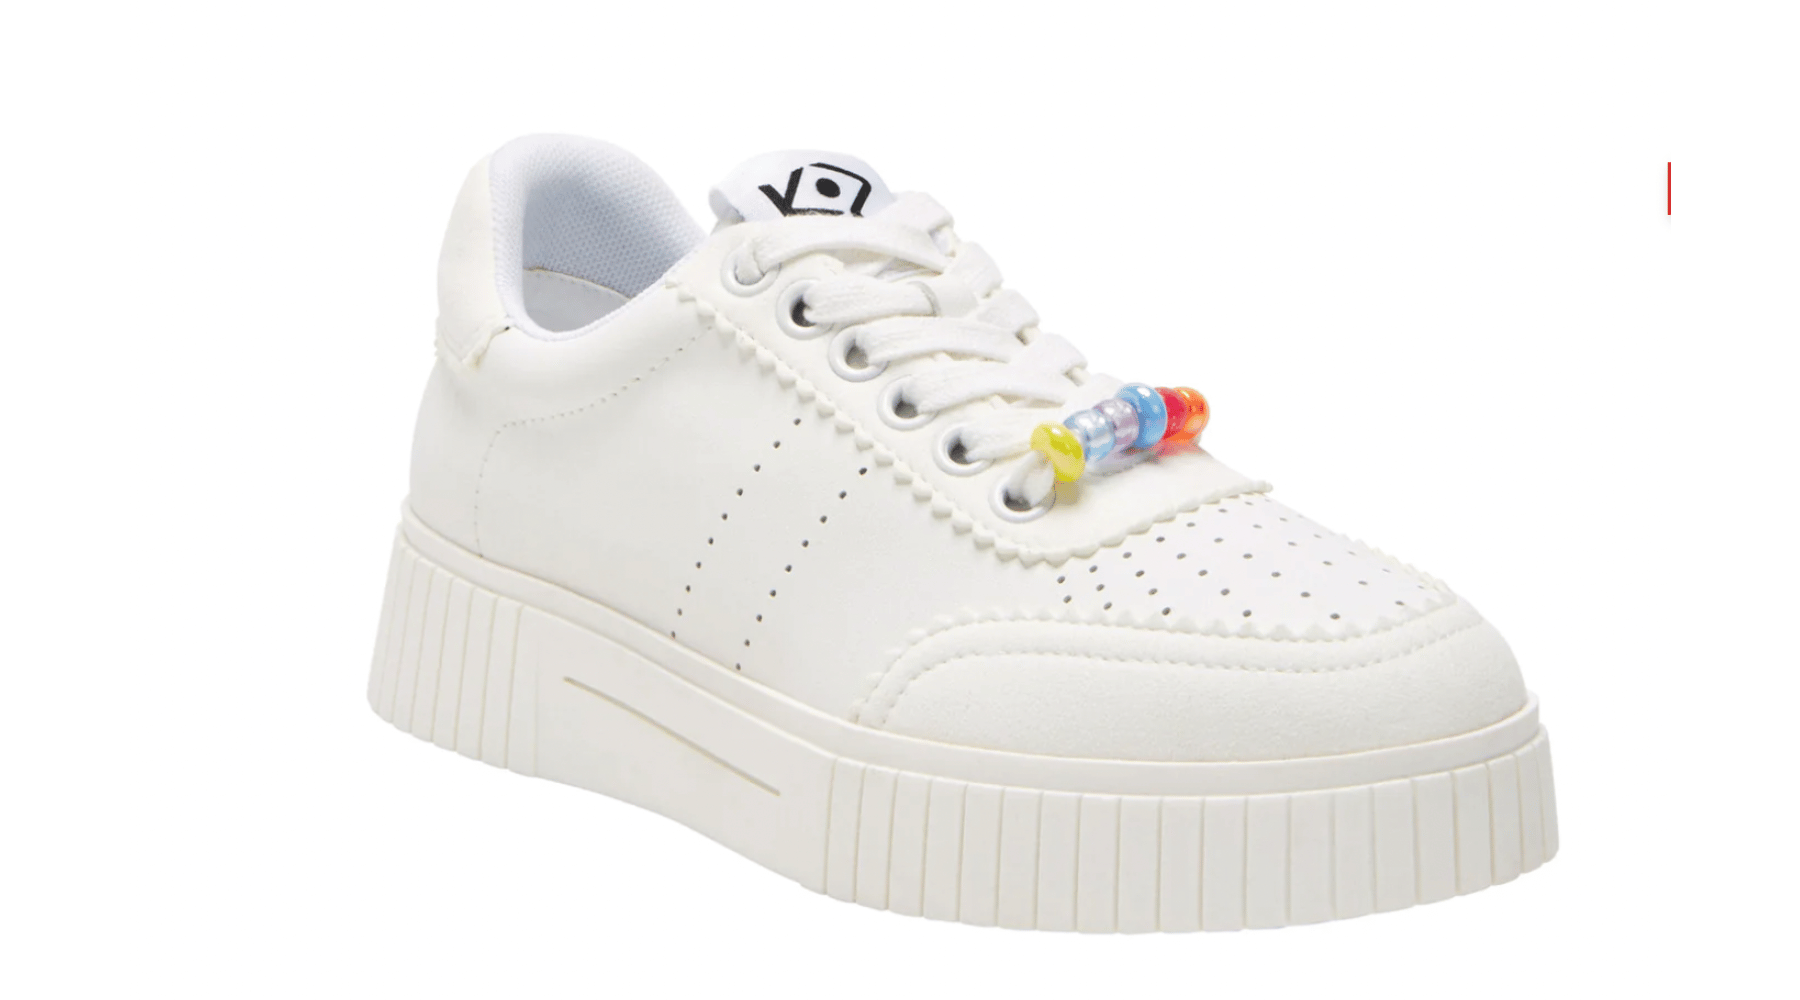 Platform white sneakers with colored beads on base of laces by Katy Perry